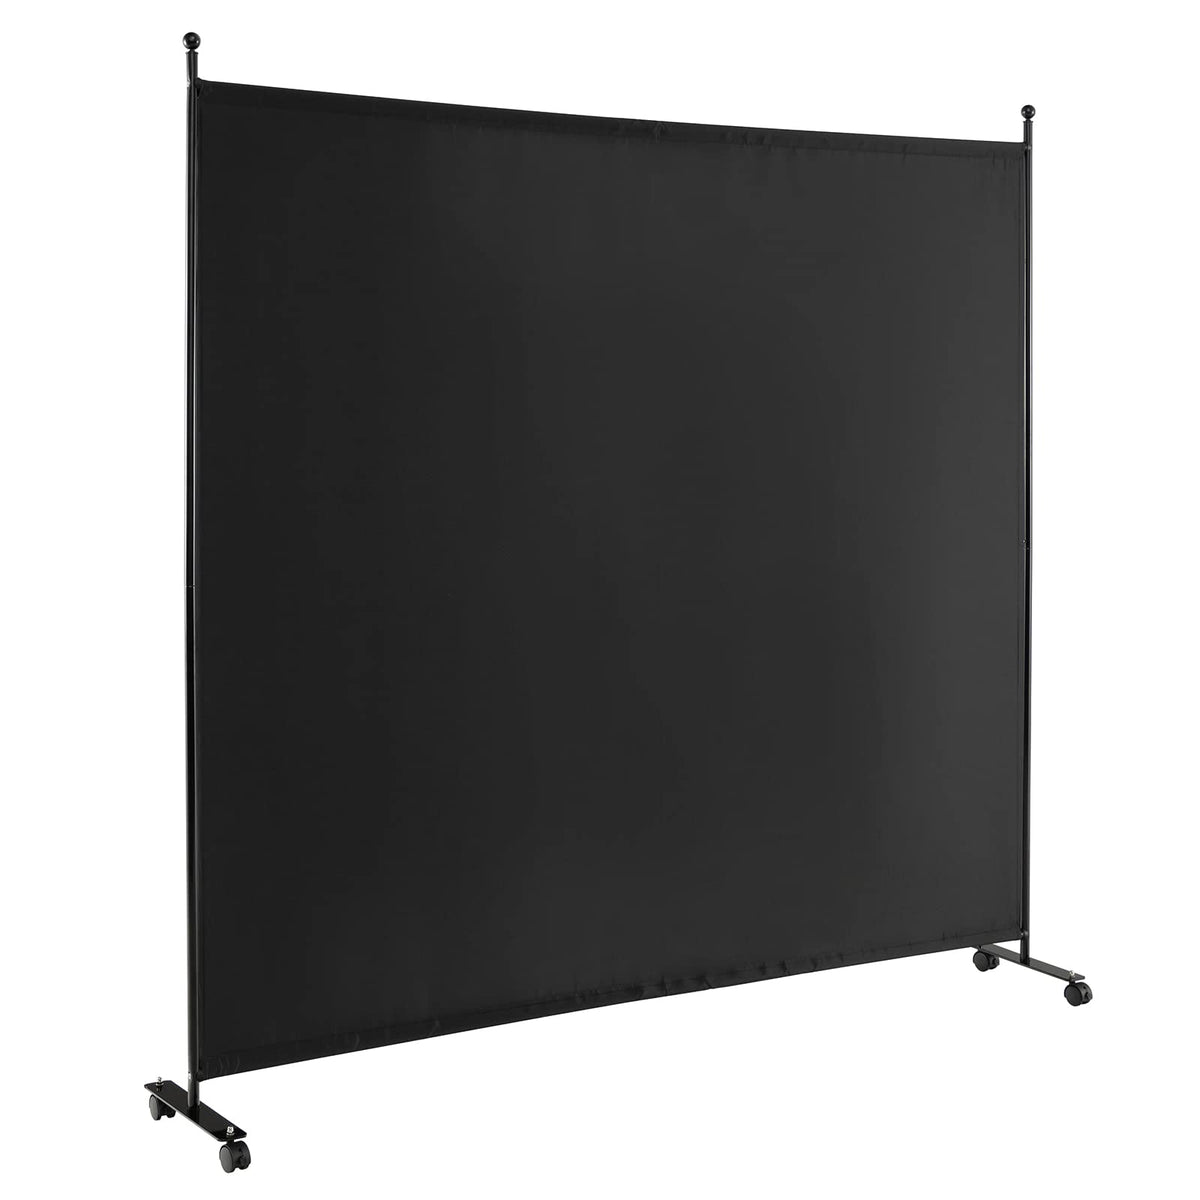 Giantex184 CM Single Panel Room Divider with Wheels